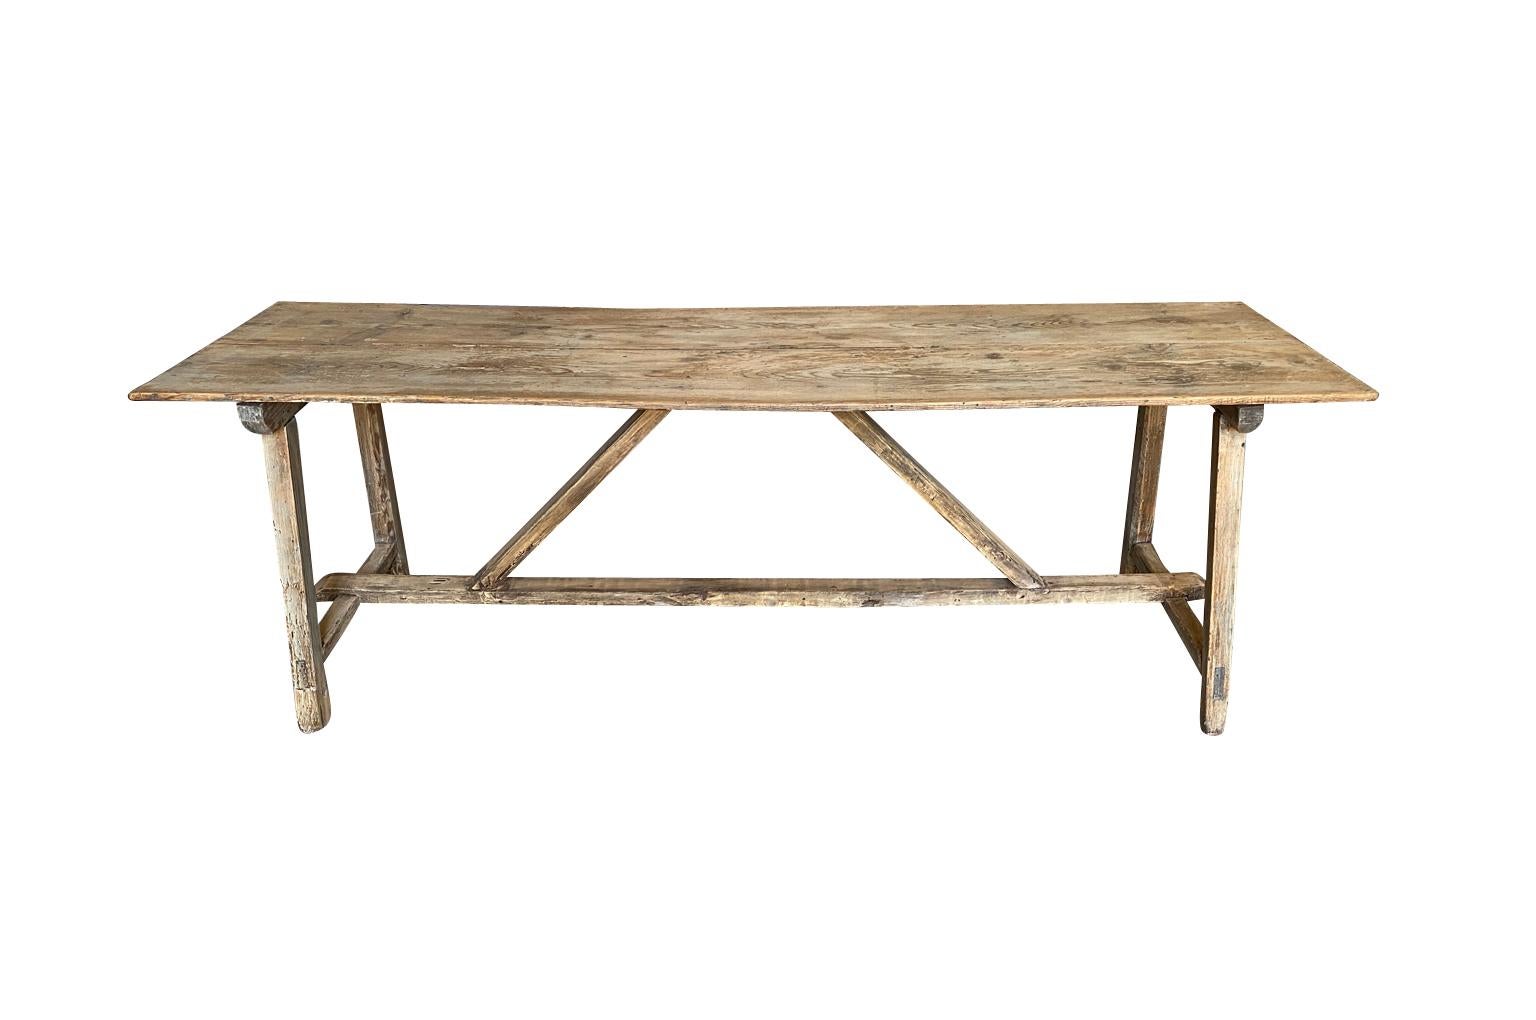 A very charming rustic table from the Catalan region of Spain. Soundly constructed from Meleze - a very hard pine. Terrific patina. Serves beautifully as a console table or intimate dining table.